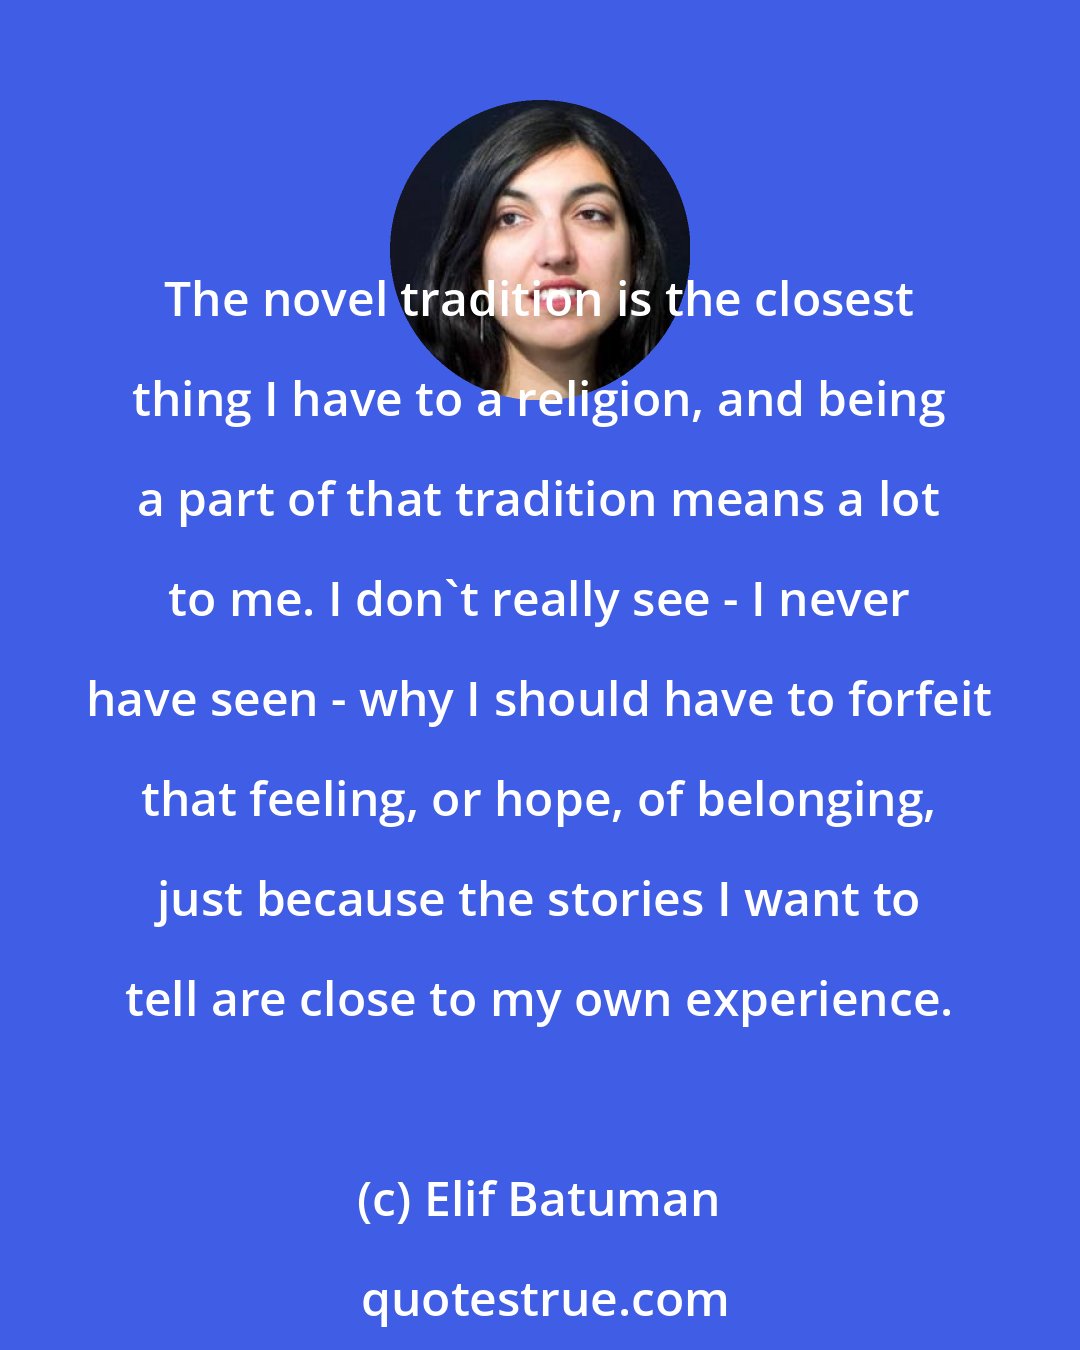 Elif Batuman: The novel tradition is the closest thing I have to a religion, and being a part of that tradition means a lot to me. I don't really see - I never have seen - why I should have to forfeit that feeling, or hope, of belonging, just because the stories I want to tell are close to my own experience.